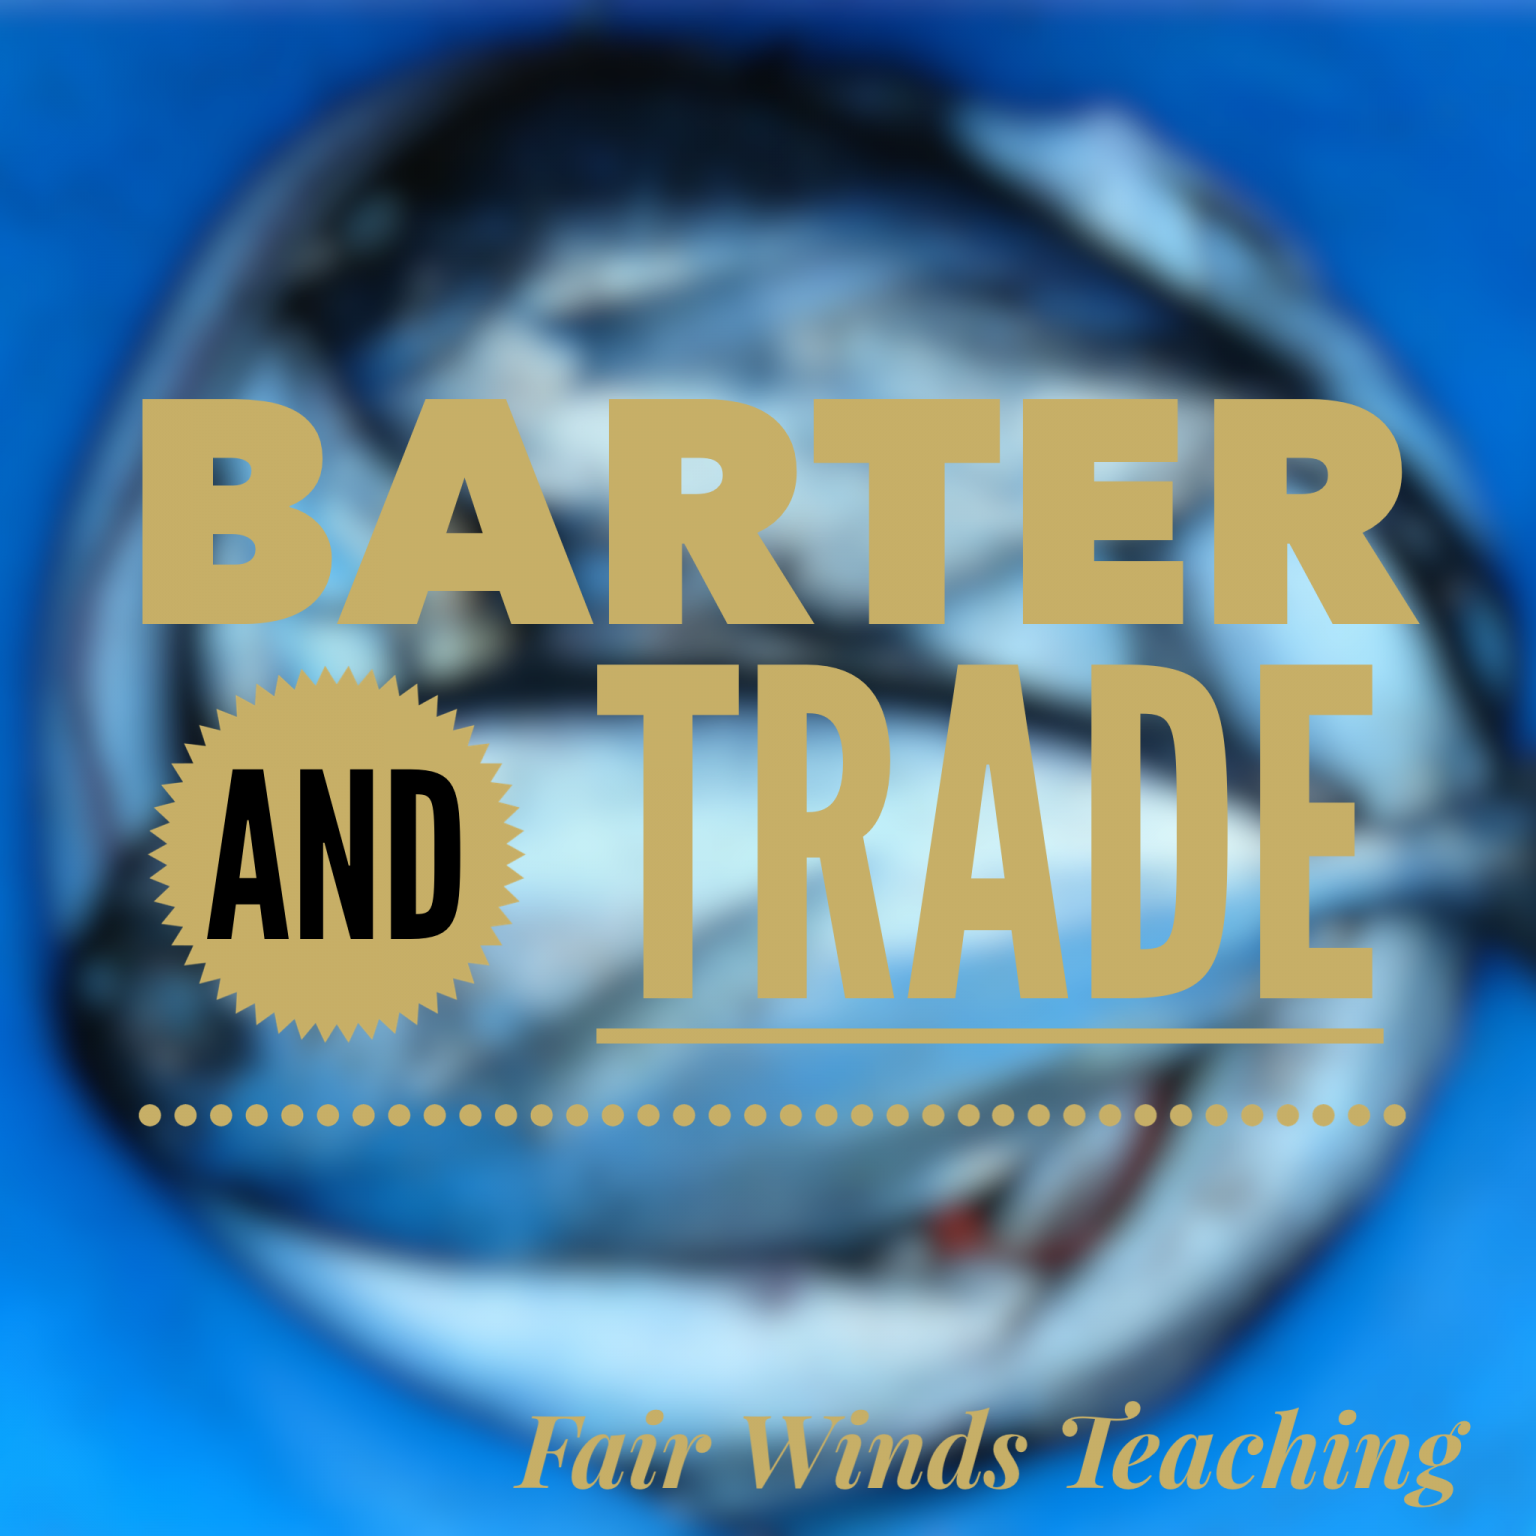 Barter and Trade